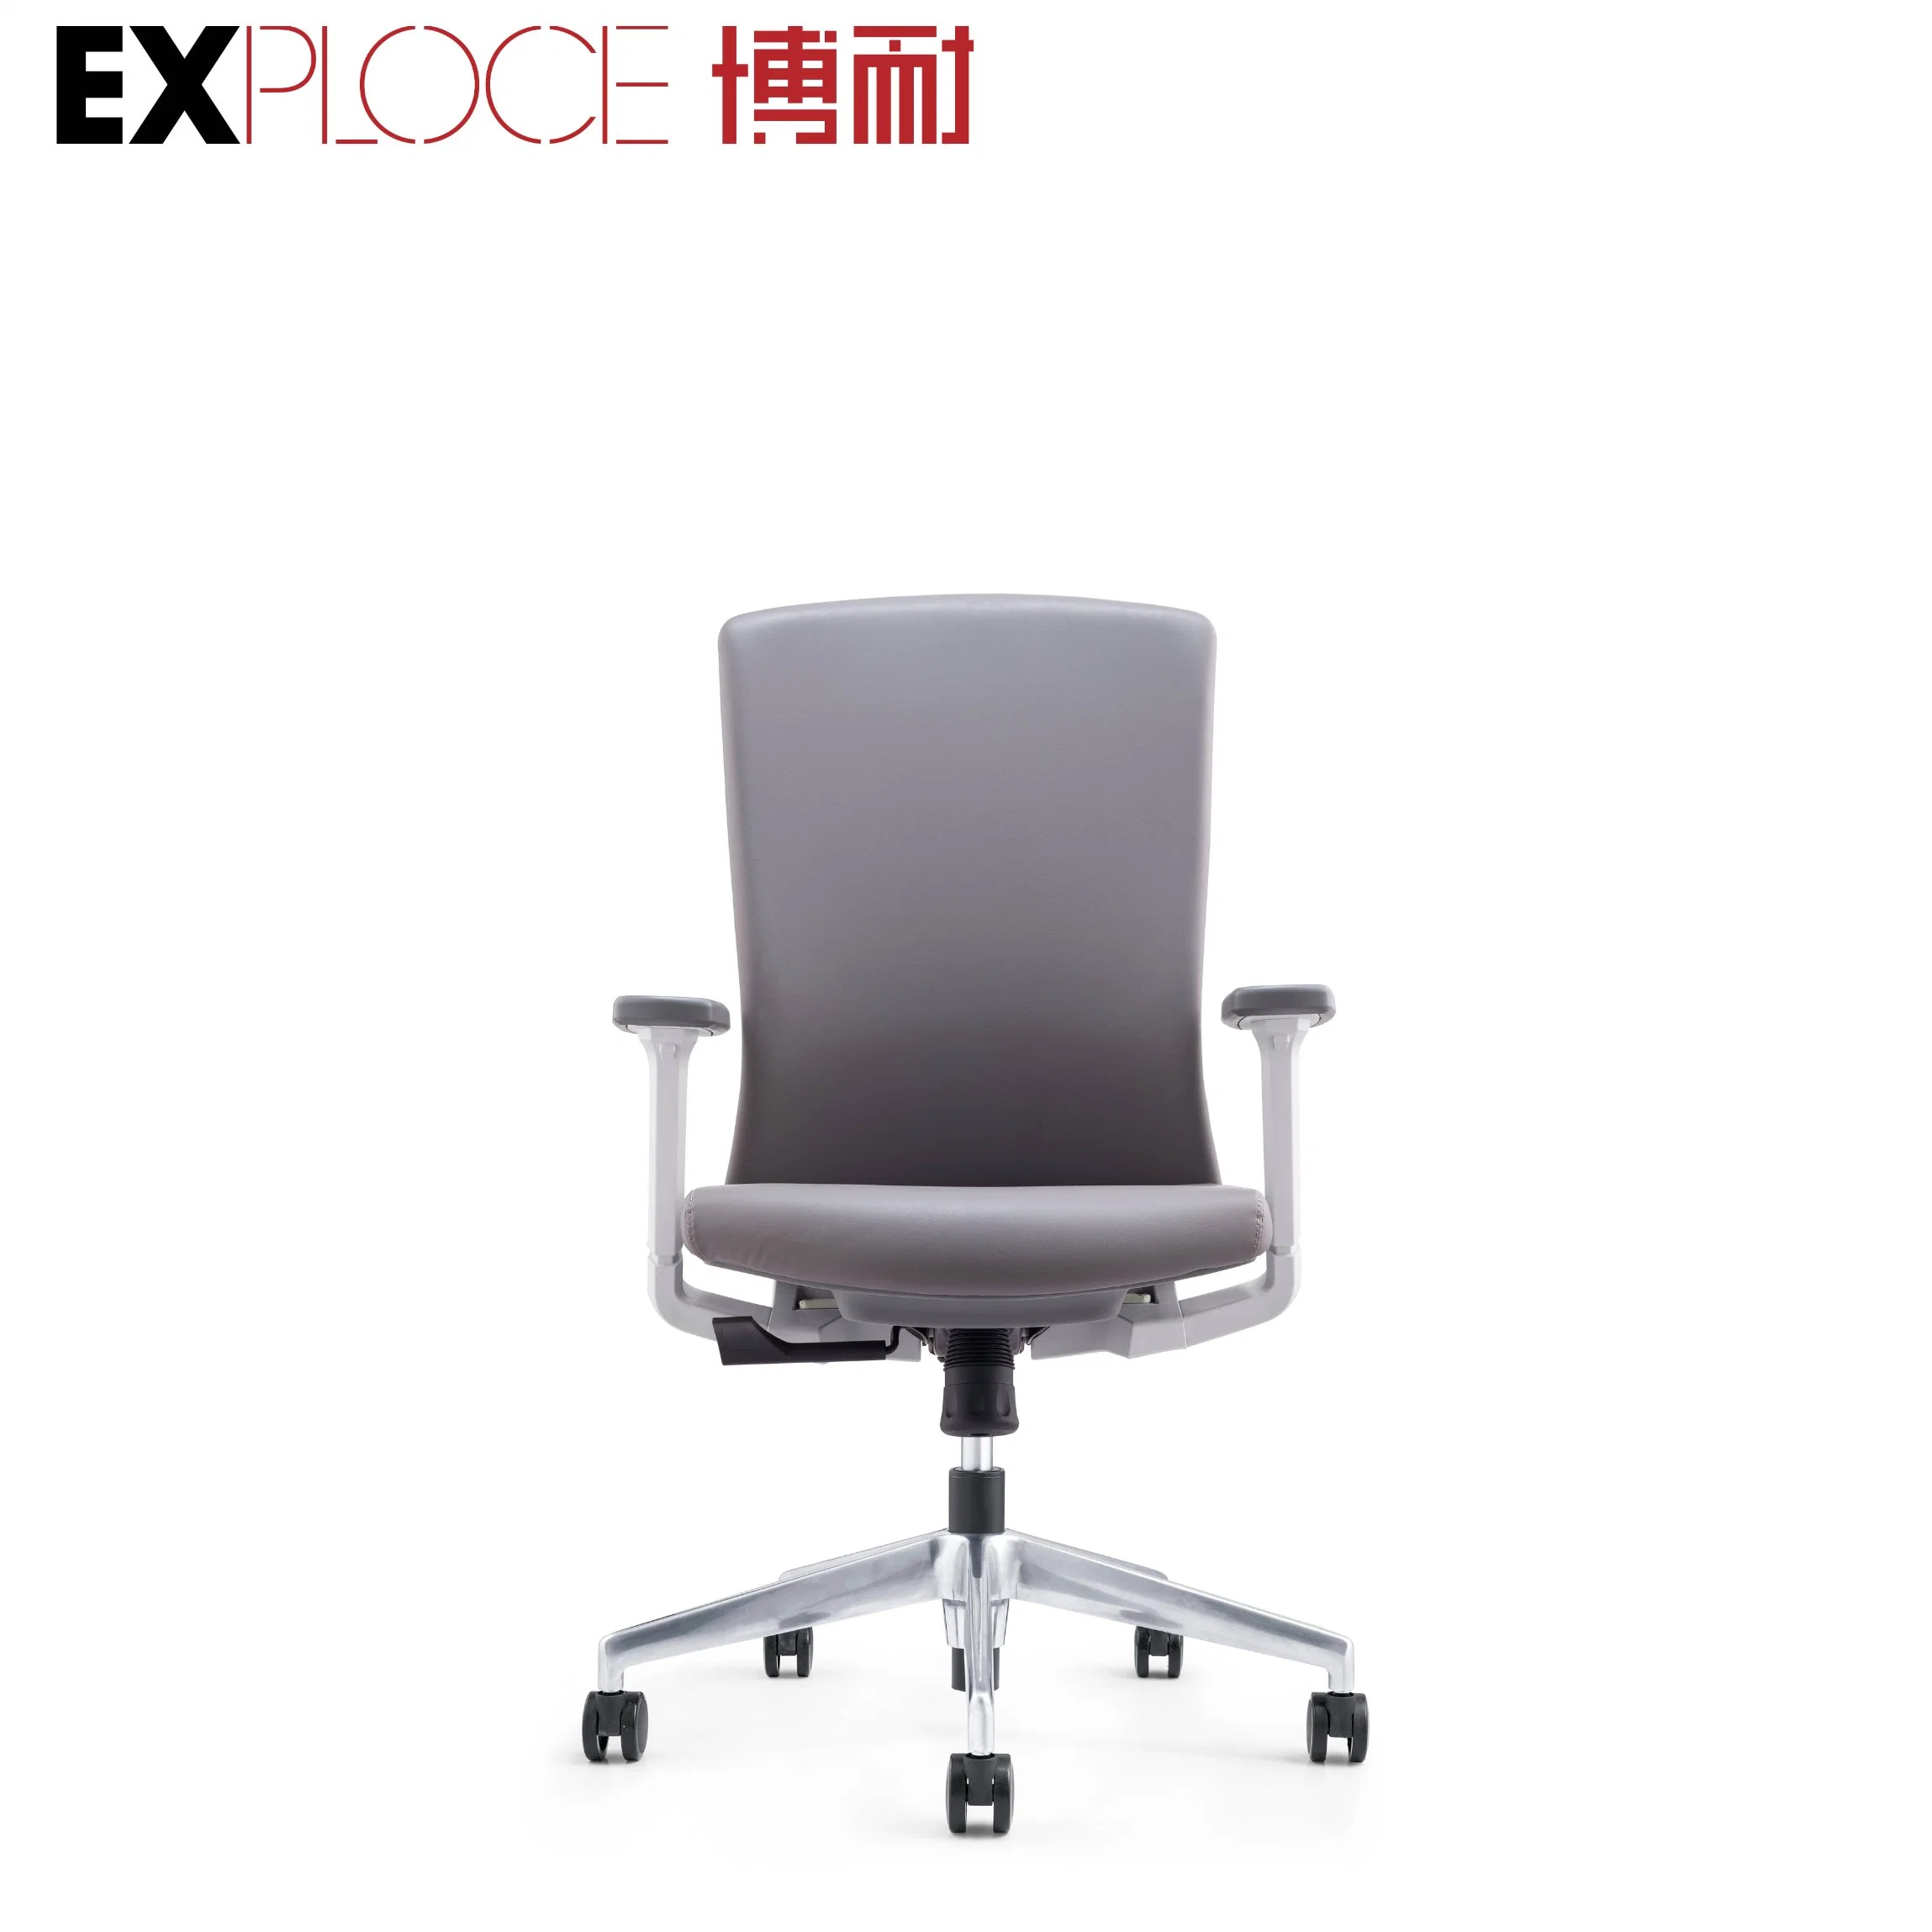 Ergonomic Study Comfortable Hotel Adjustable Armrest PU Leather Director New Computer Office Chair Furniture